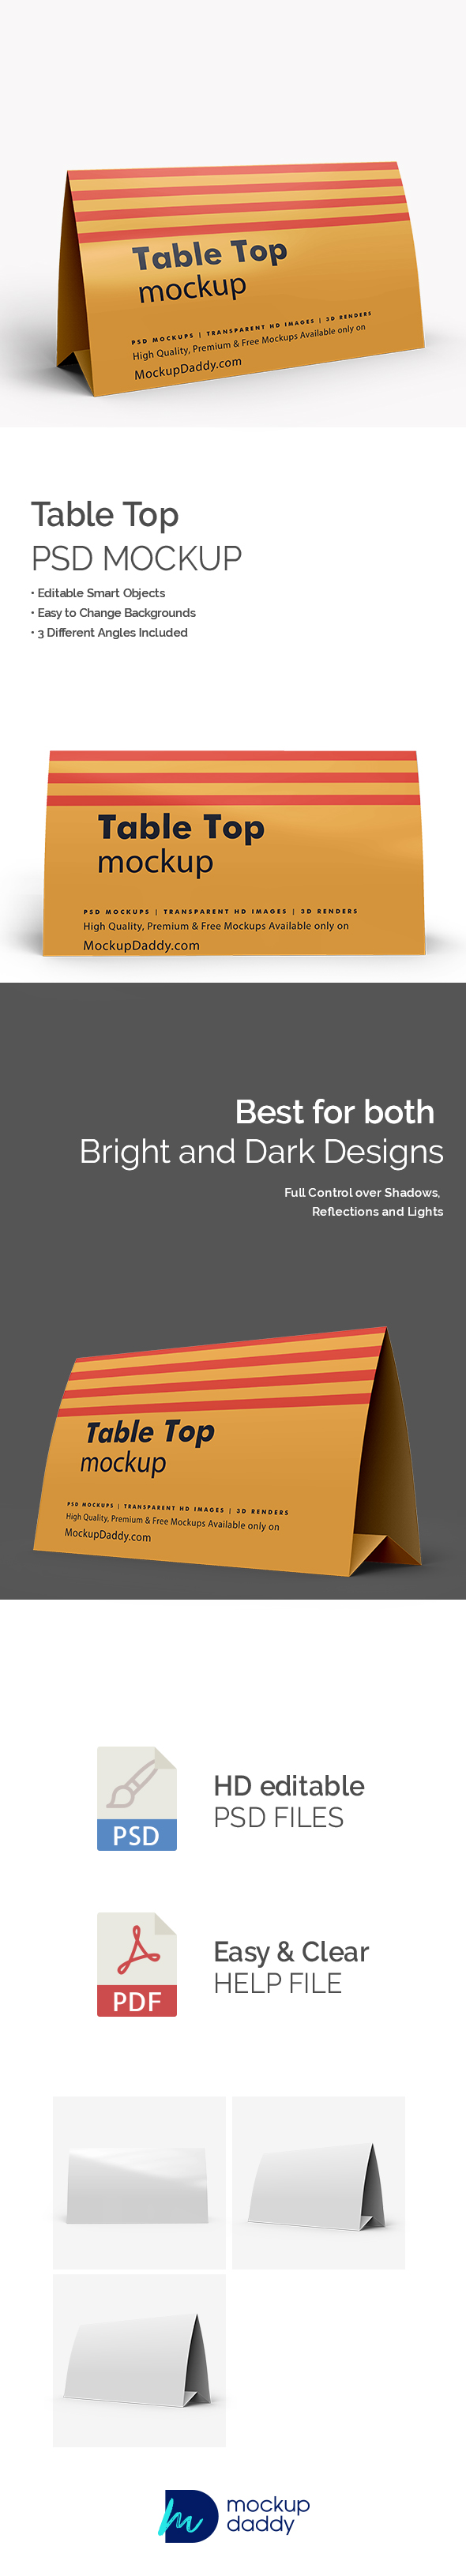 Table Top Mockup Featured